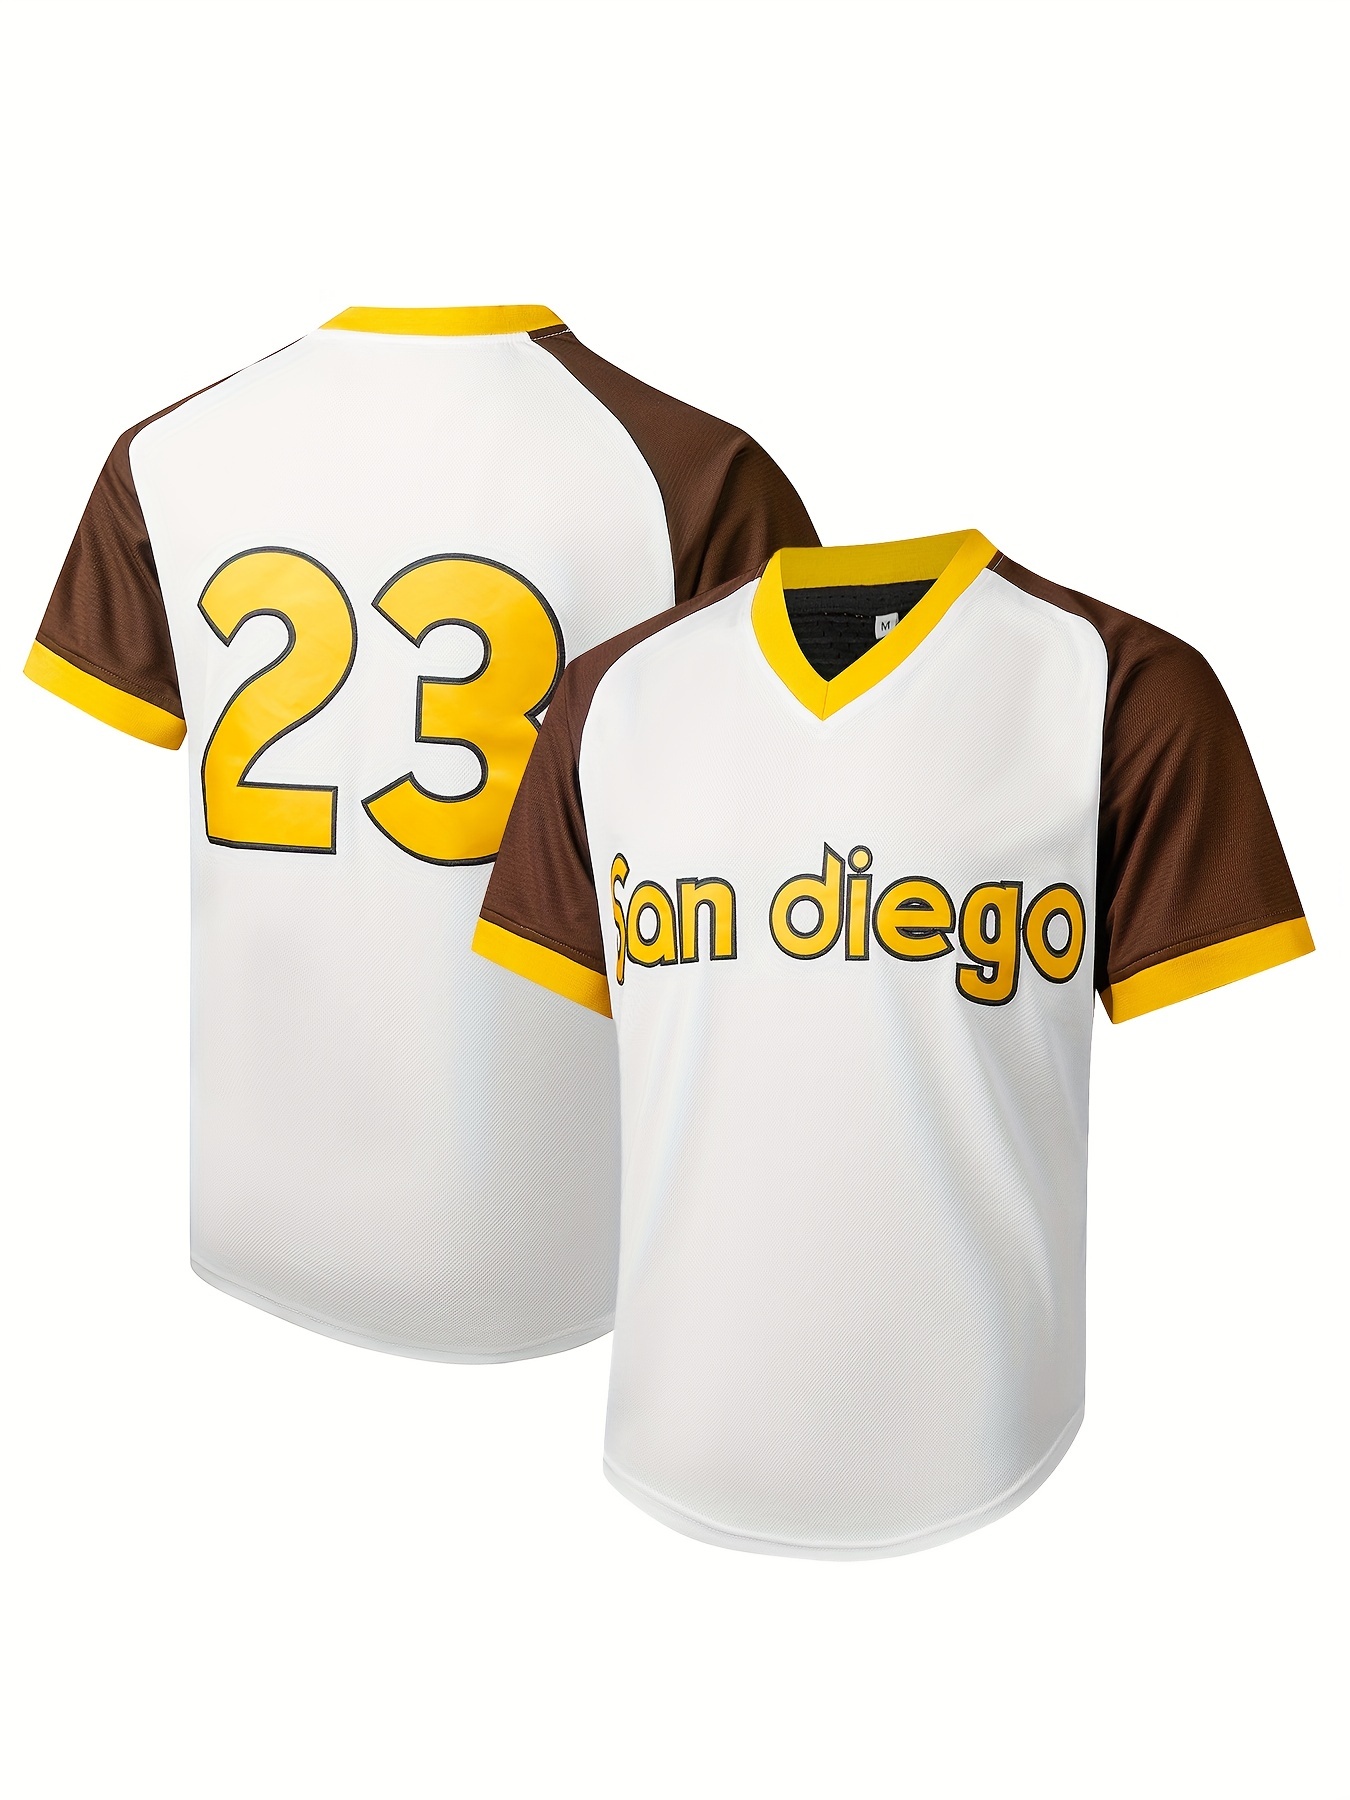 Mens San Diego 23 Baseball Jersey Retro Classic Baseball Shirt Breathable  Embroidery V Neck Pullover Sports Uniform For Training Competition Party, 24/7 Customer Service